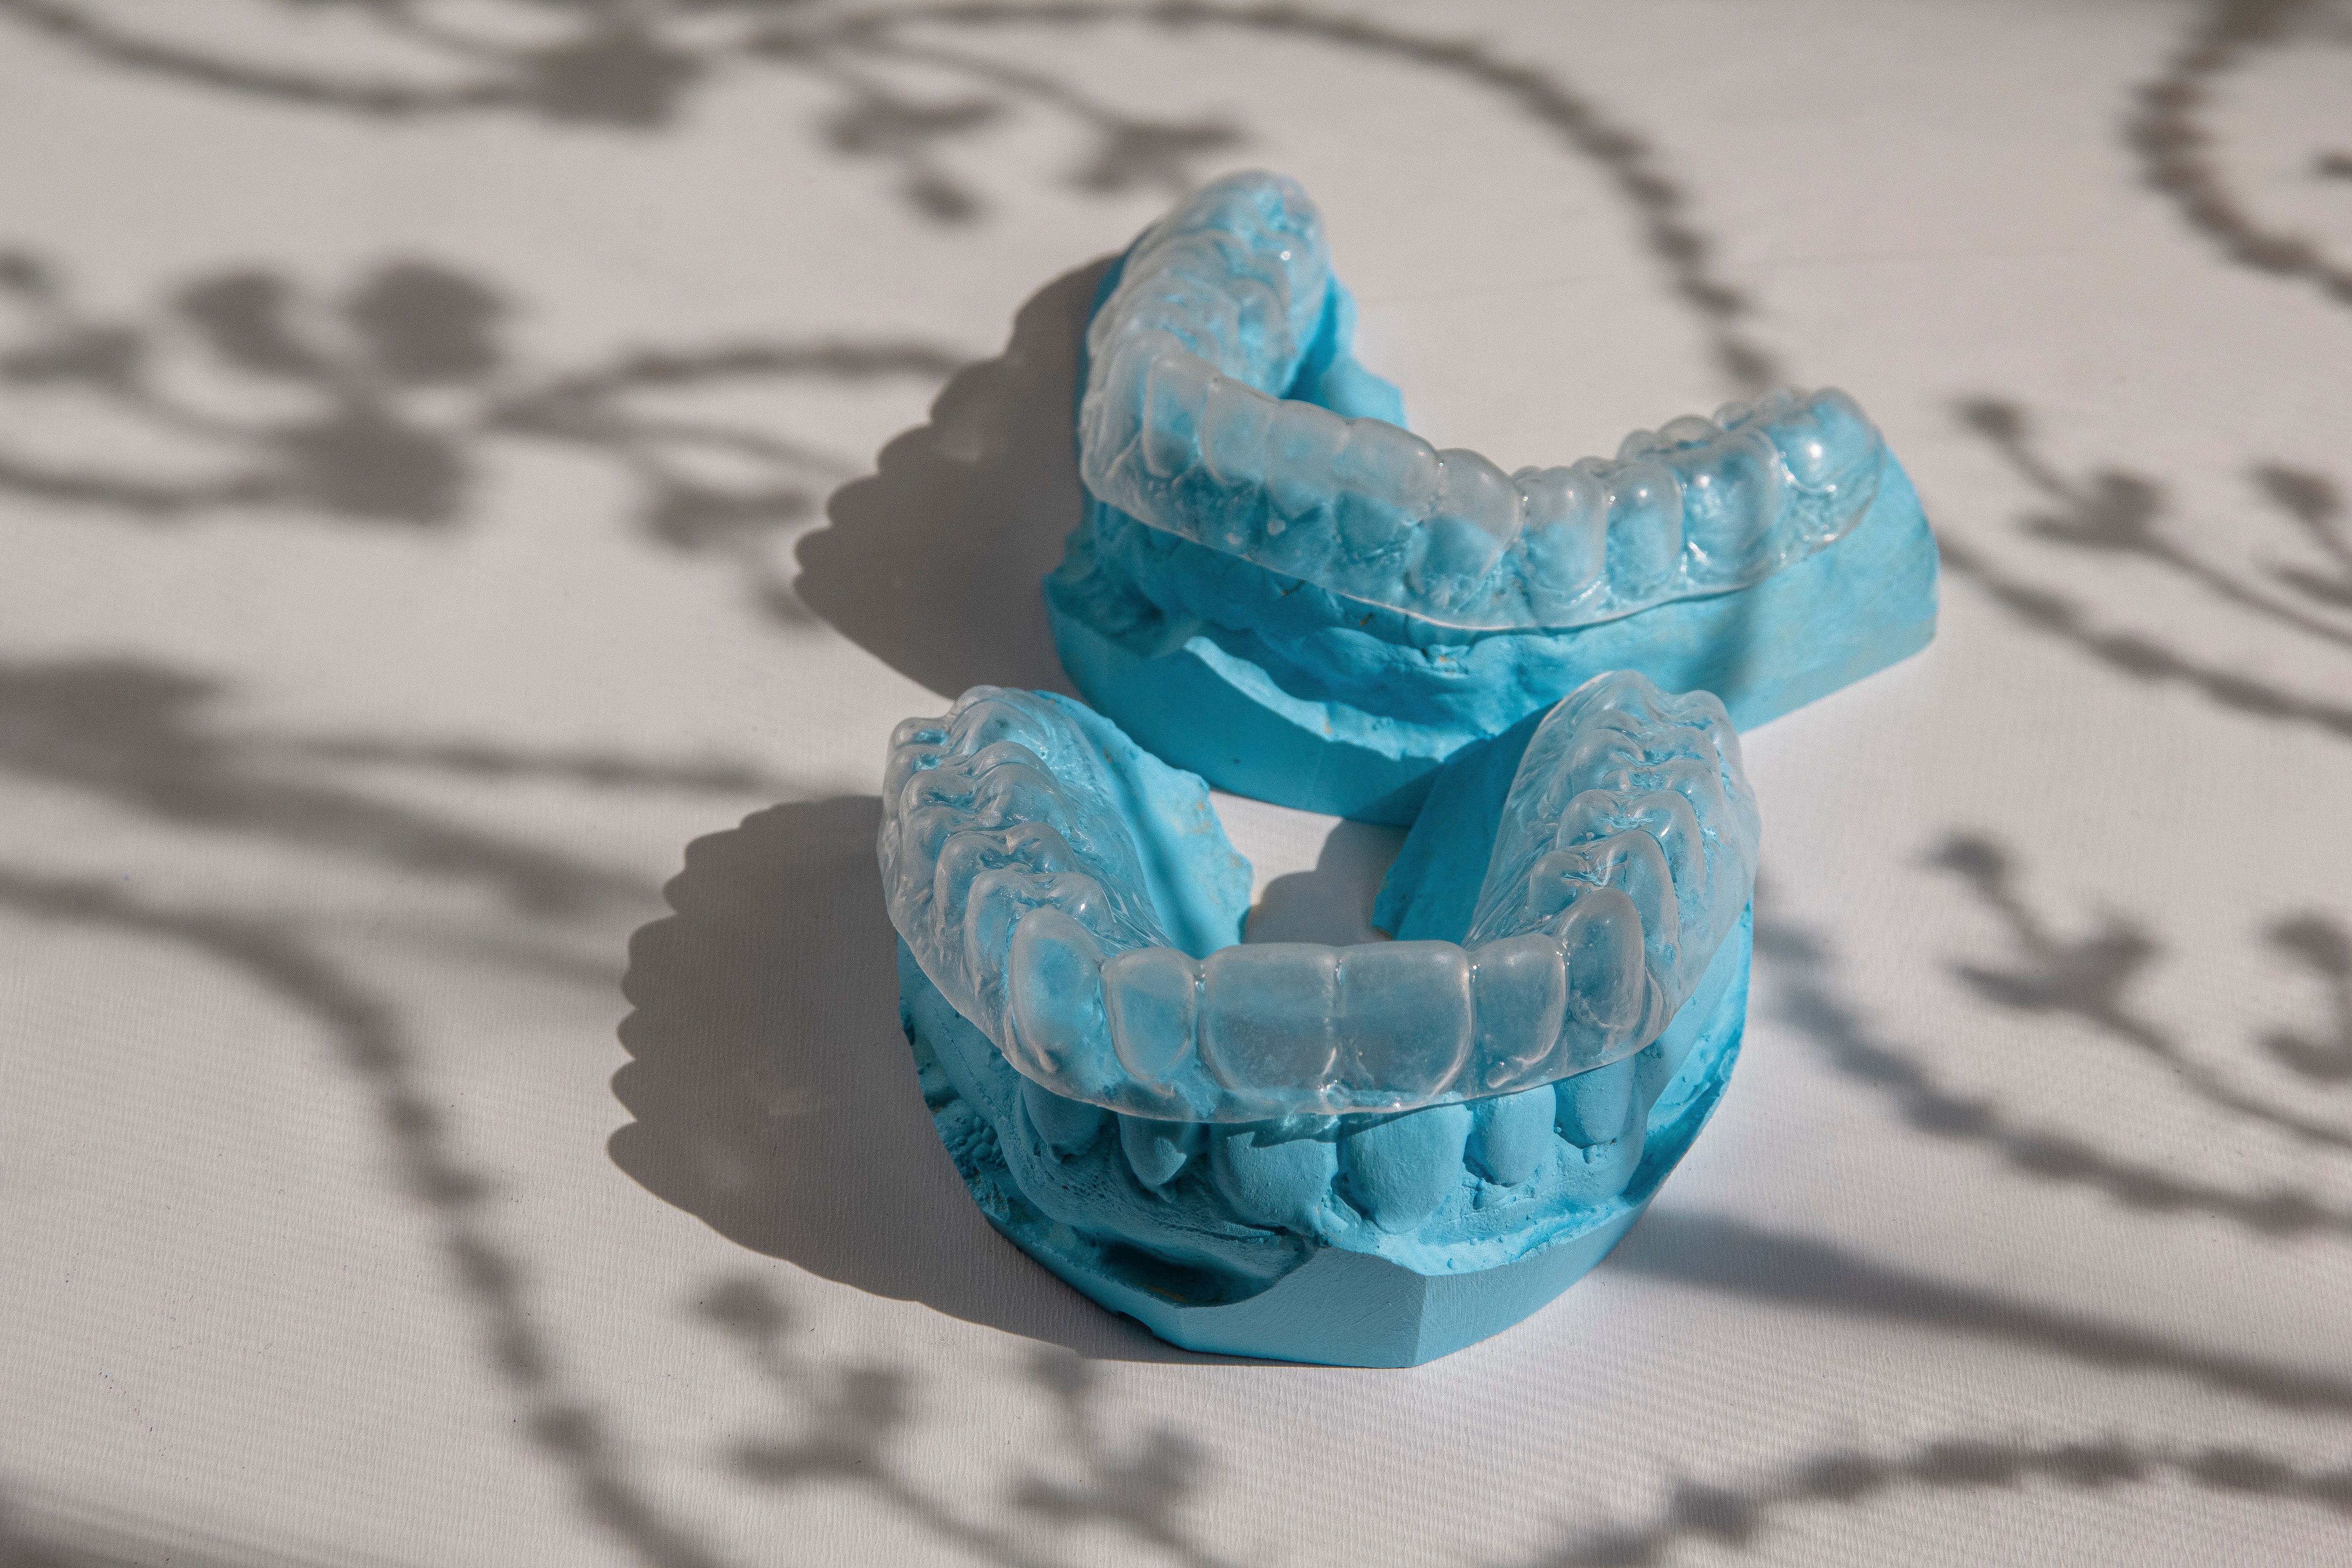 Invisalign vs. Traditional Braces – Which Is Right for You?